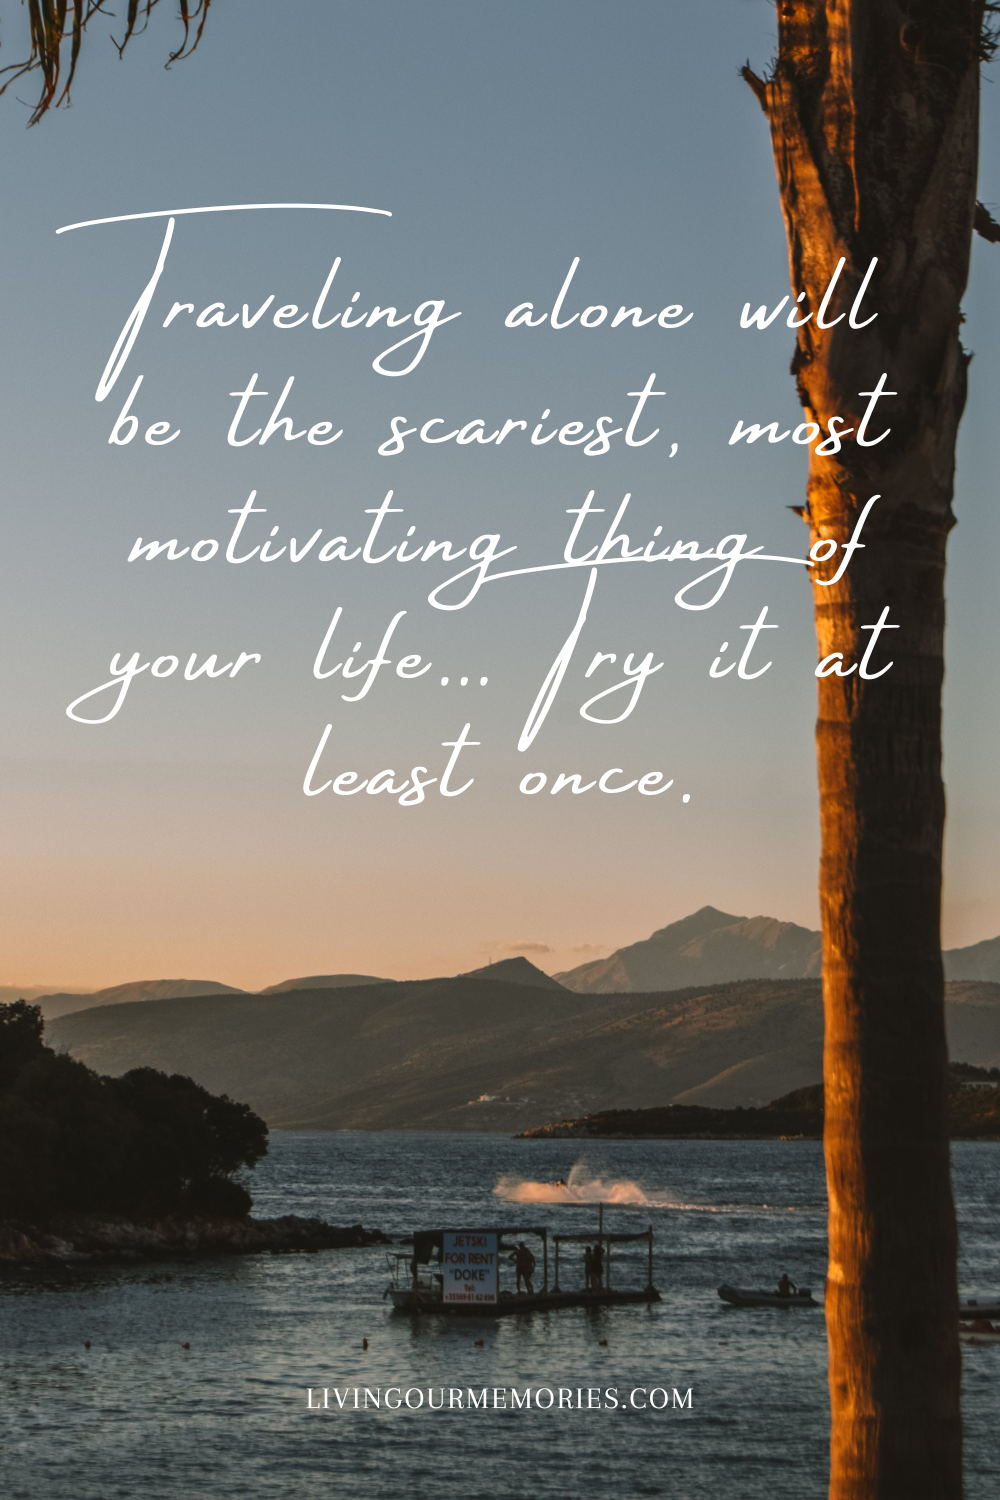 Traveling alone will be the scariest, most motivating thing of your life… Try it at least once.